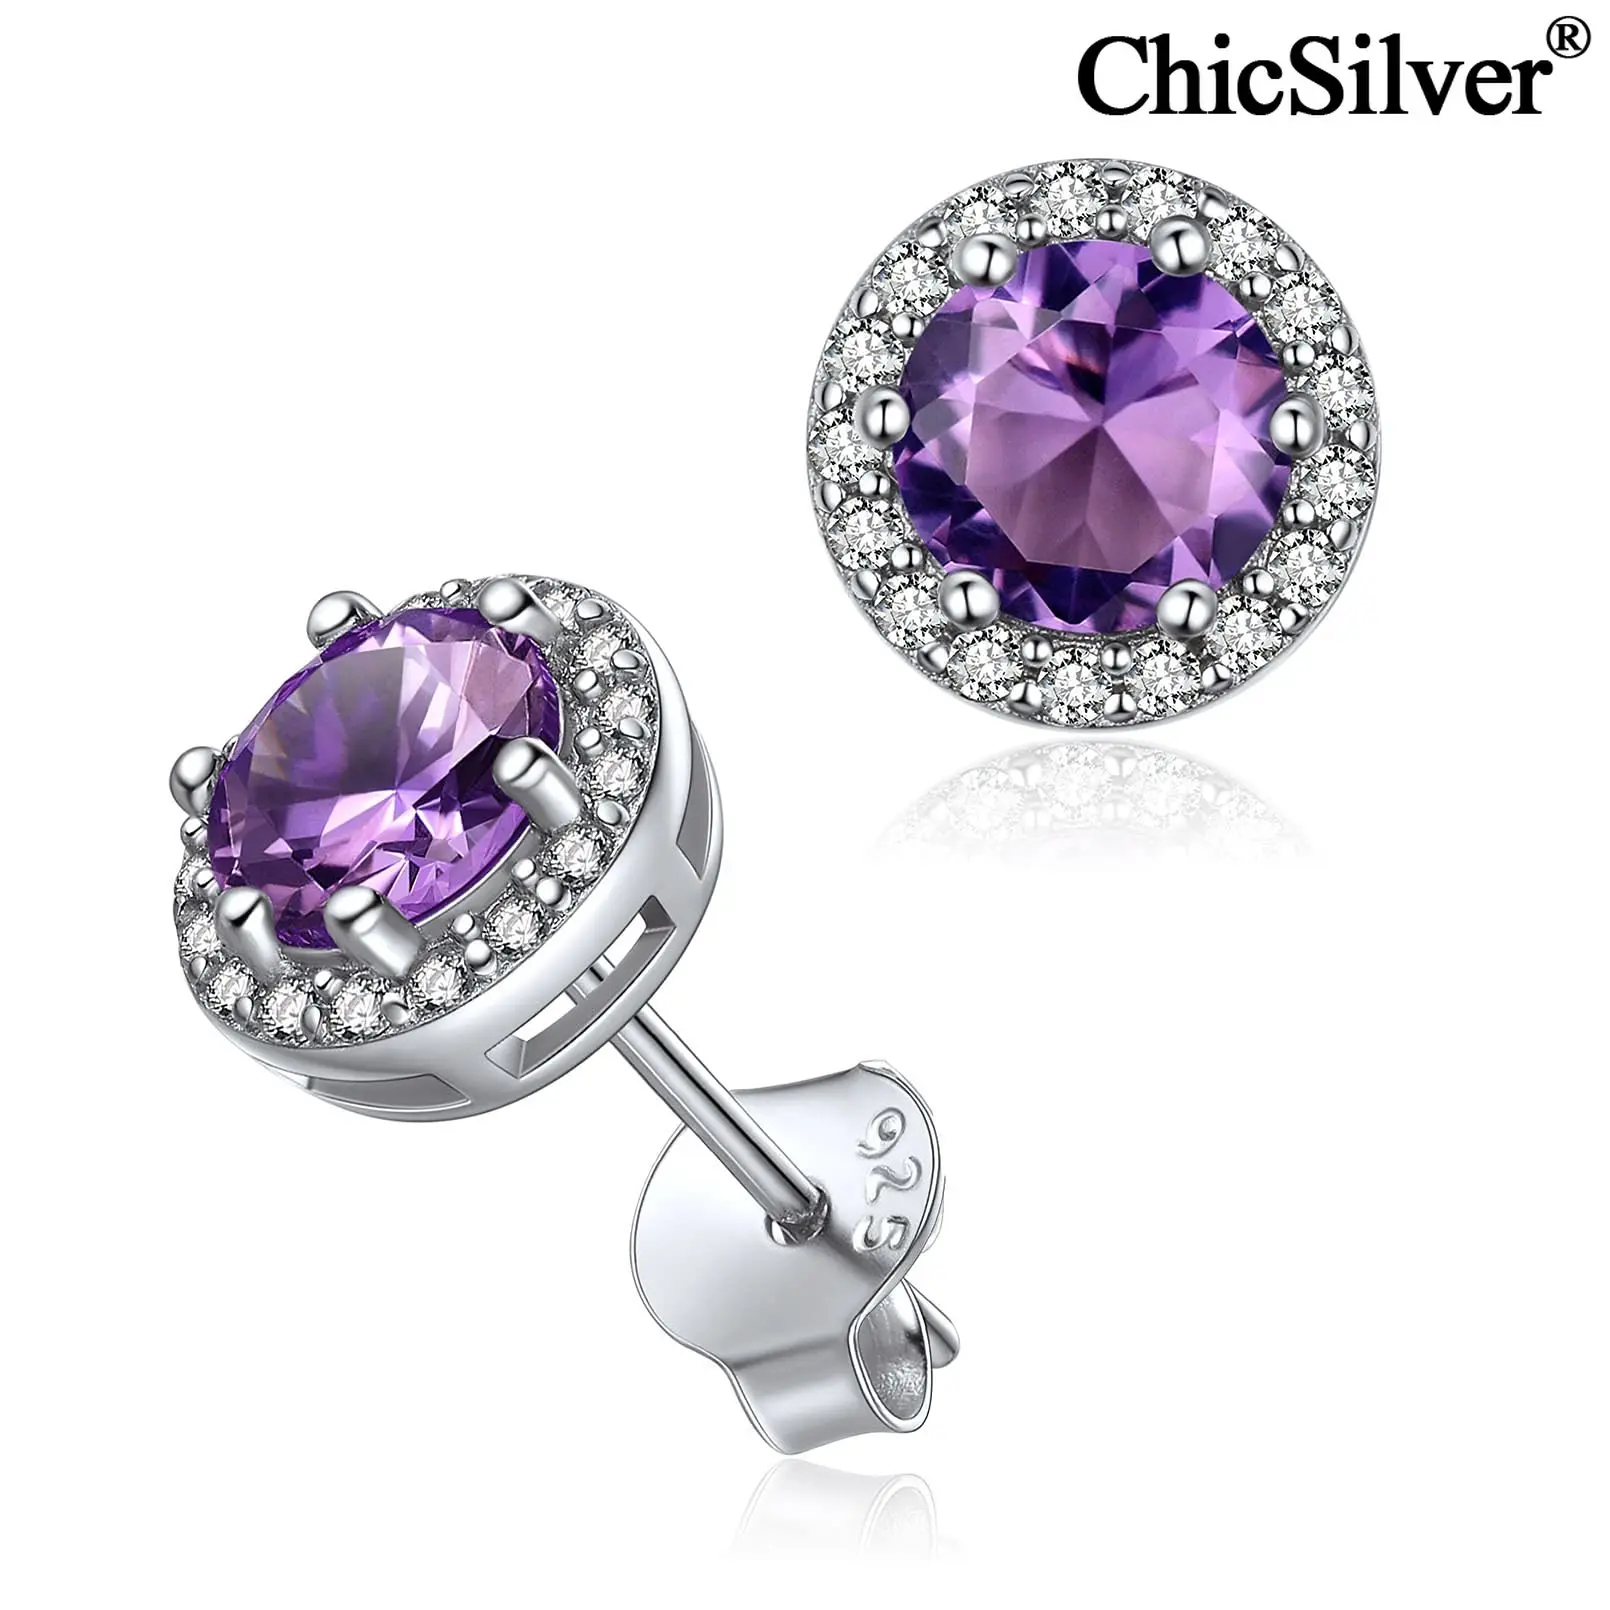 

ChicSilver Birthstone Halo Cubic Zirconia Stud Earrings For Women Hypoallergenic 925 Sterling Silver 7mm Round Crystal Jewelry